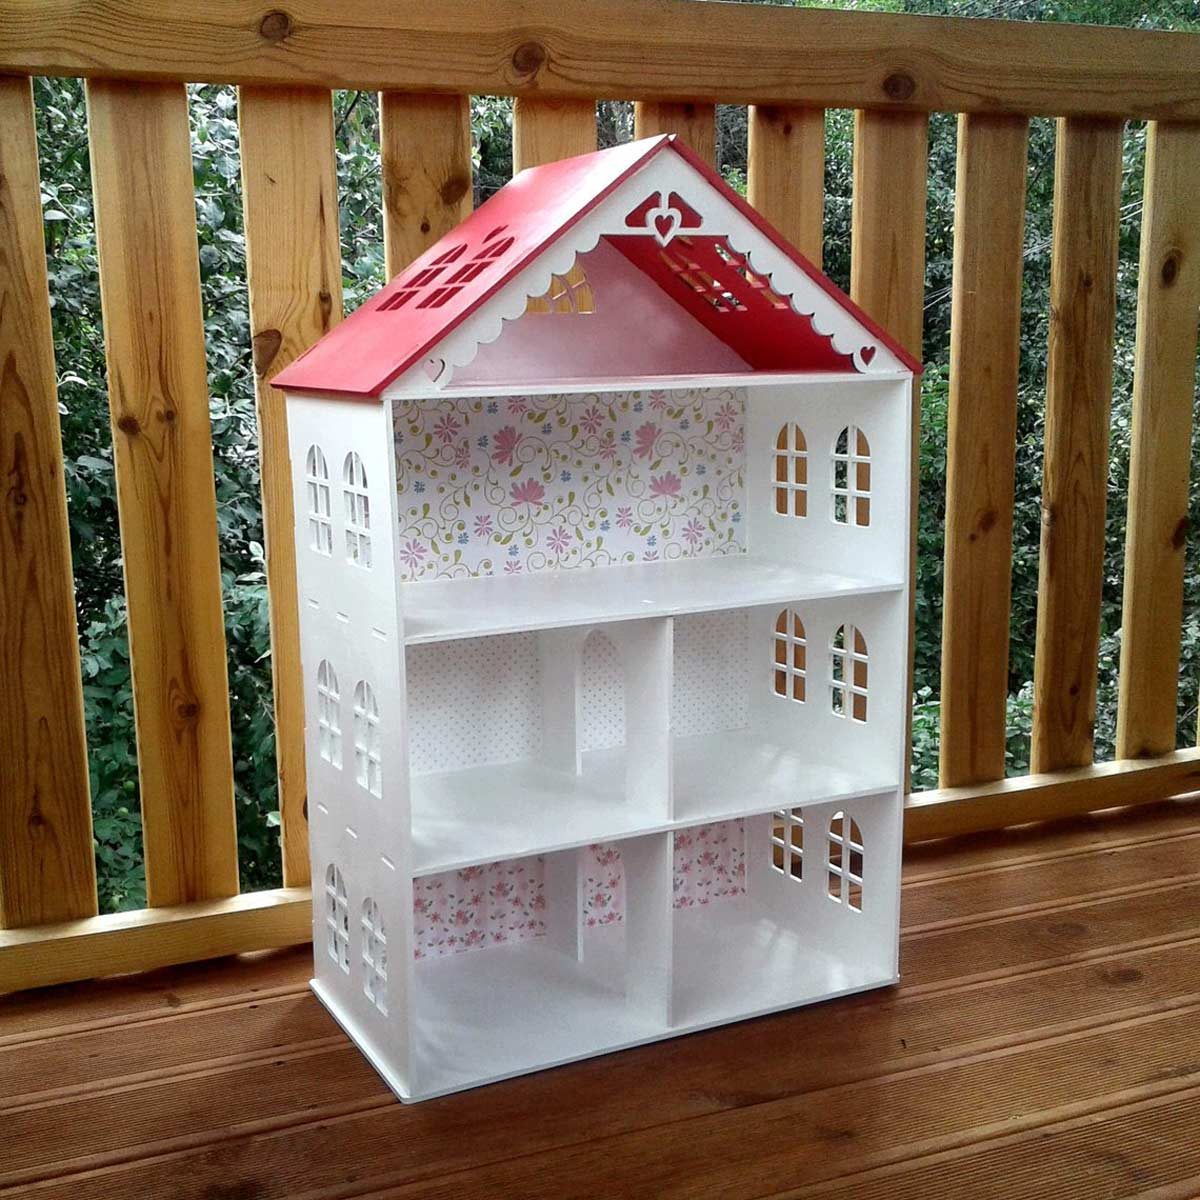 10 Homemade Barbie Houses You Wish You Lived In Family Handyman